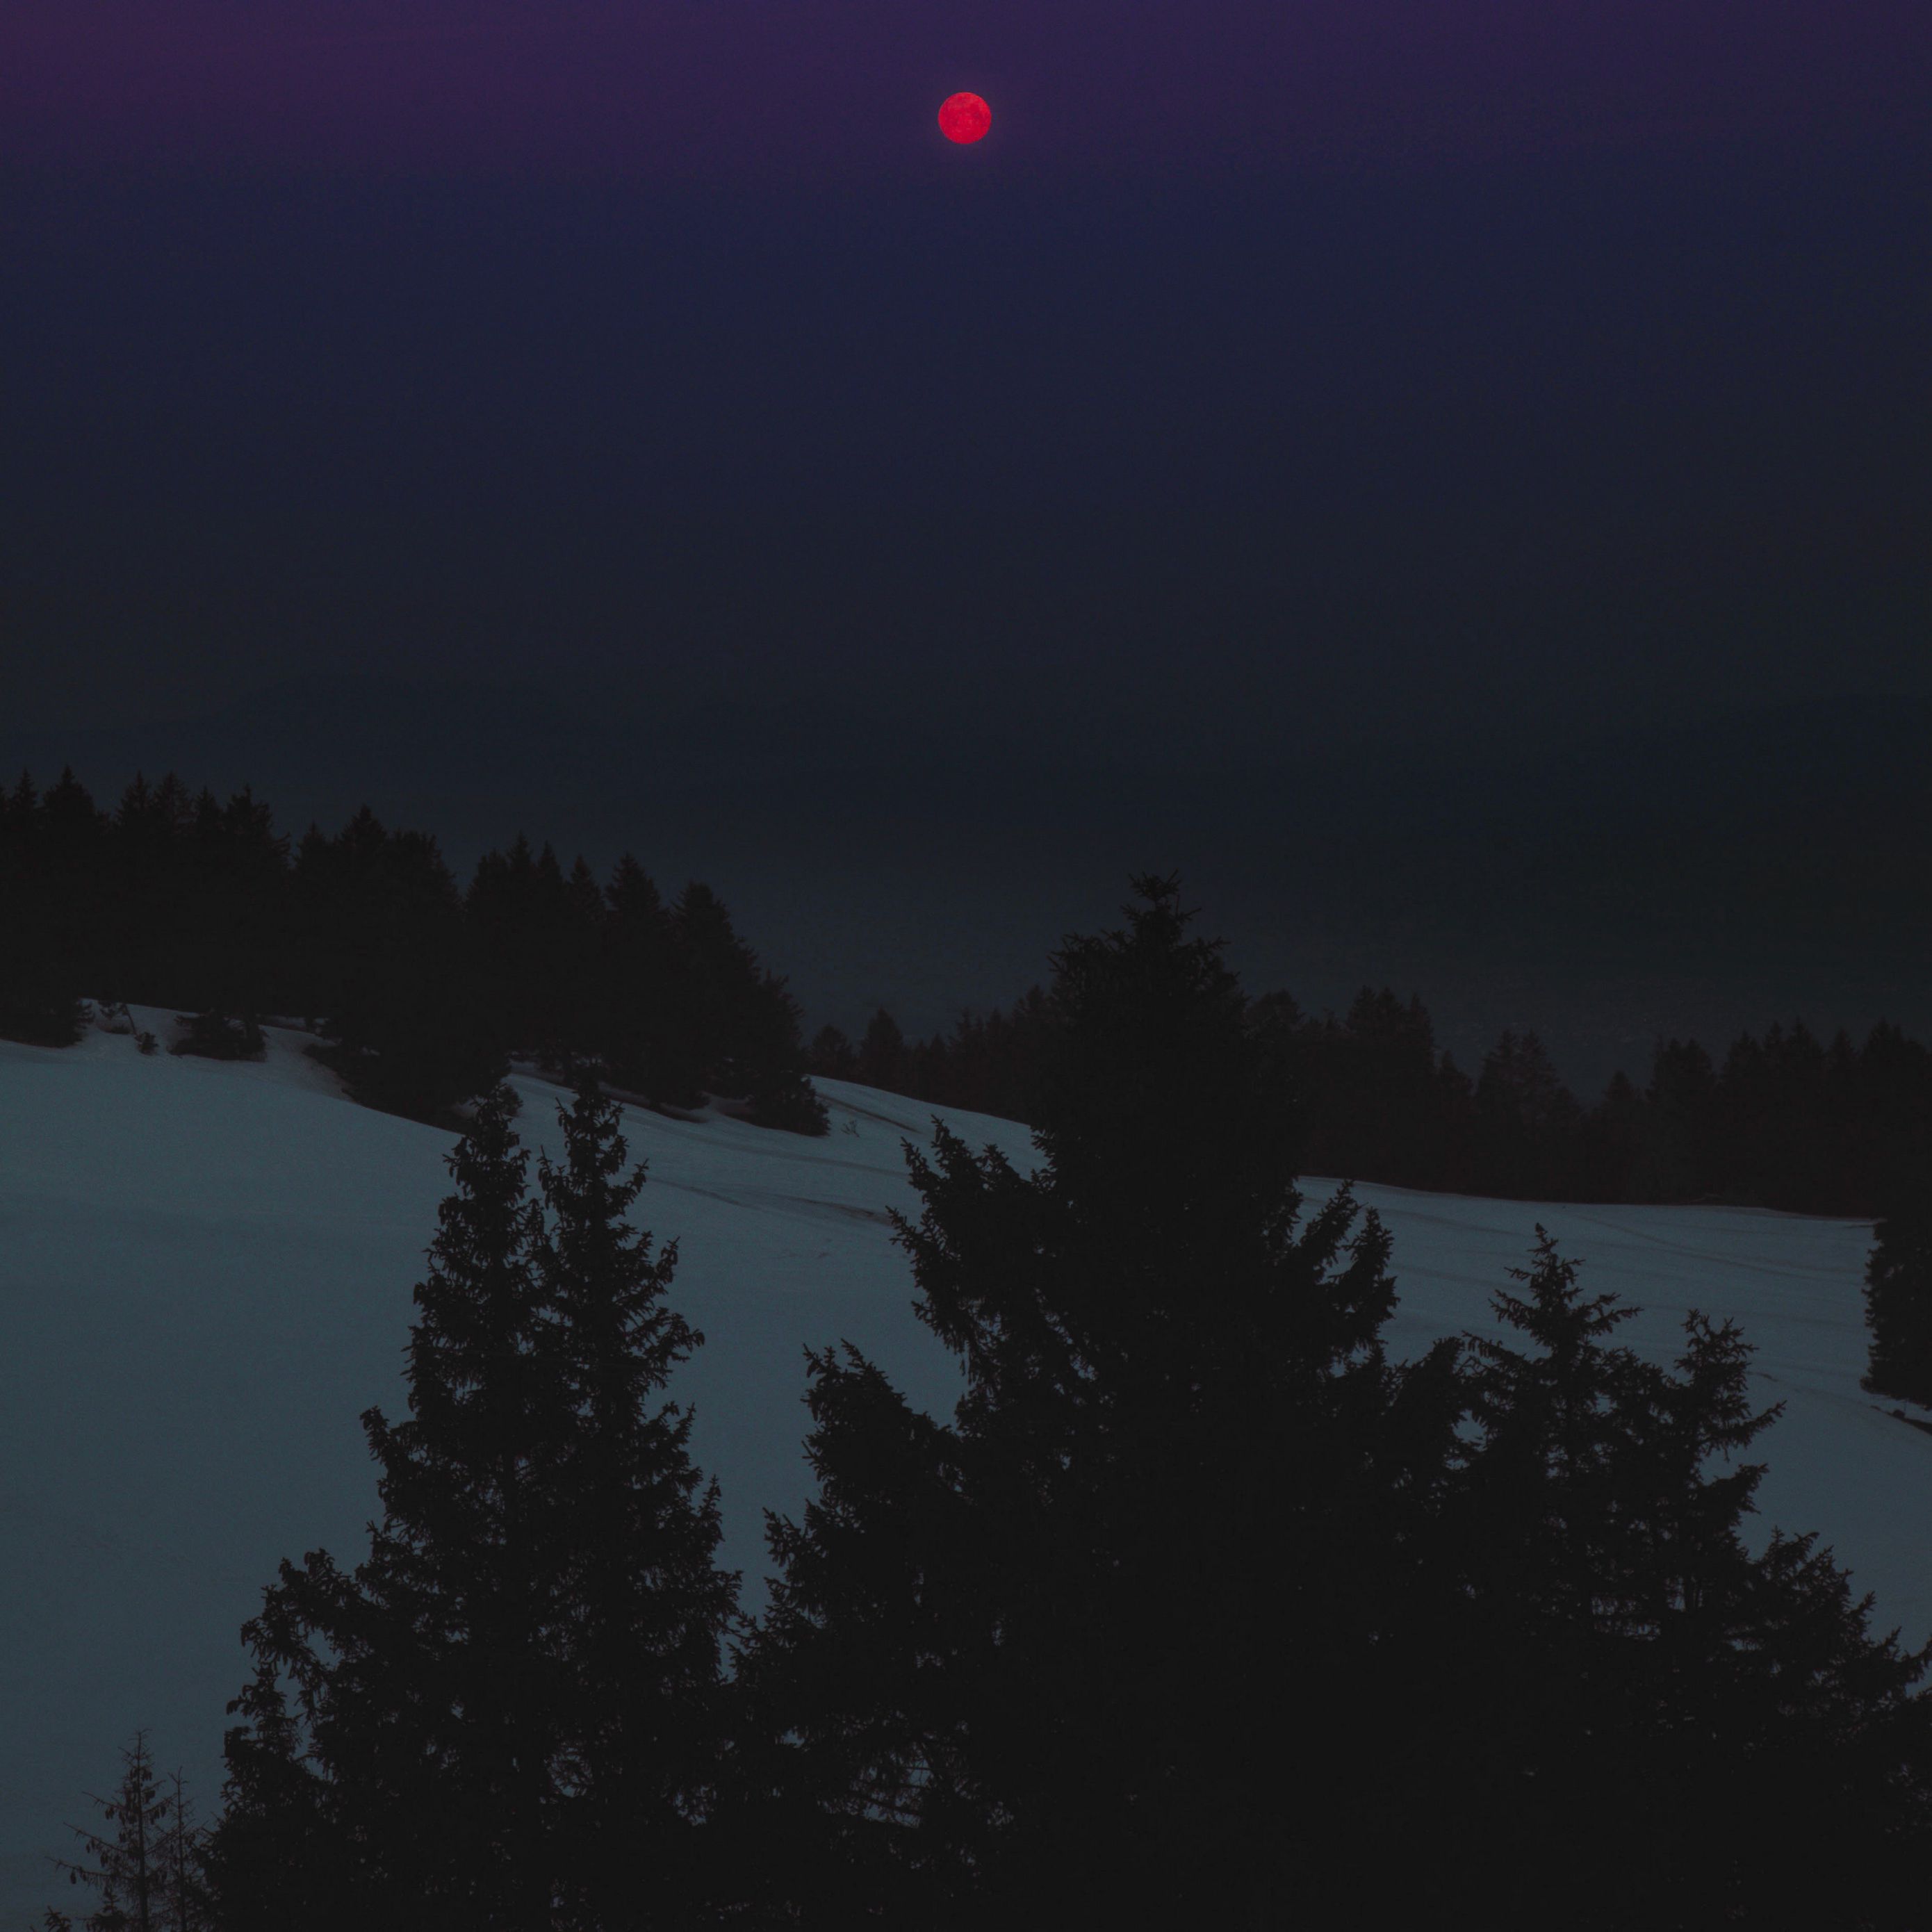 A red sun is seen above a snow-covered hill with pine trees. - Night